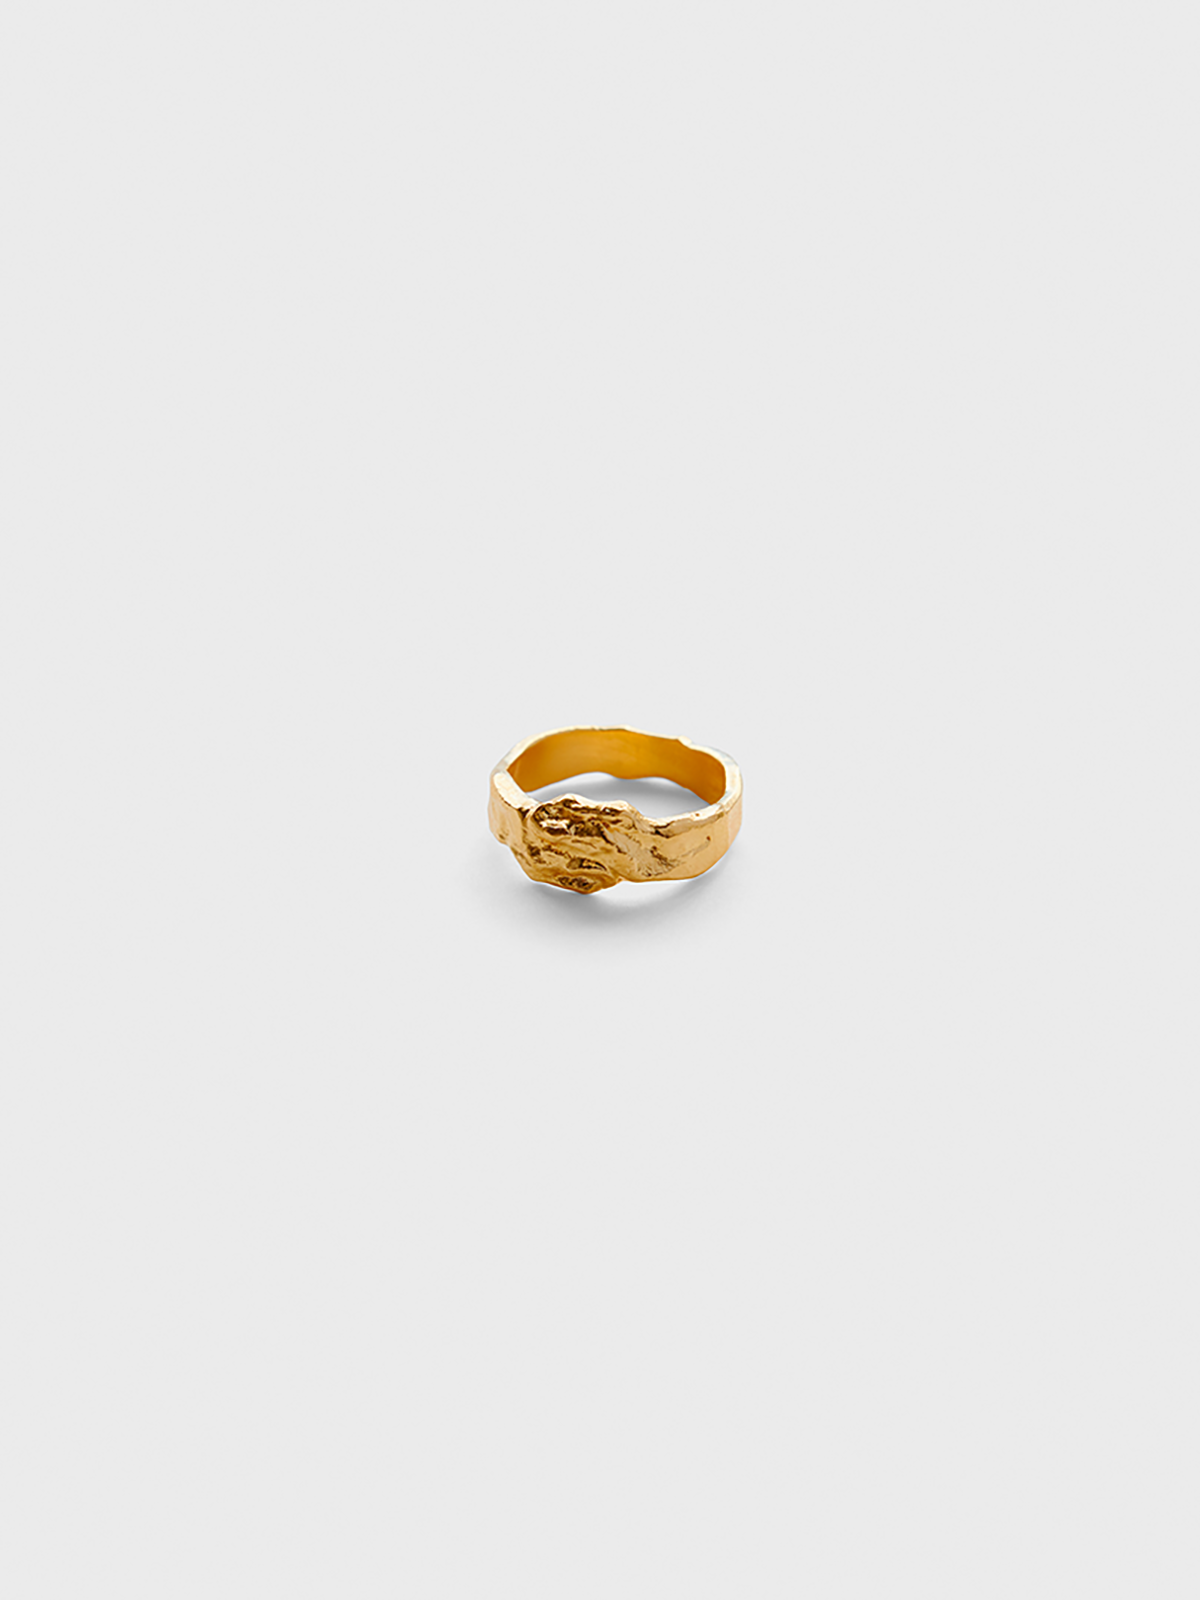 Lea Hoyer - Ellie Ring with Gold Plating